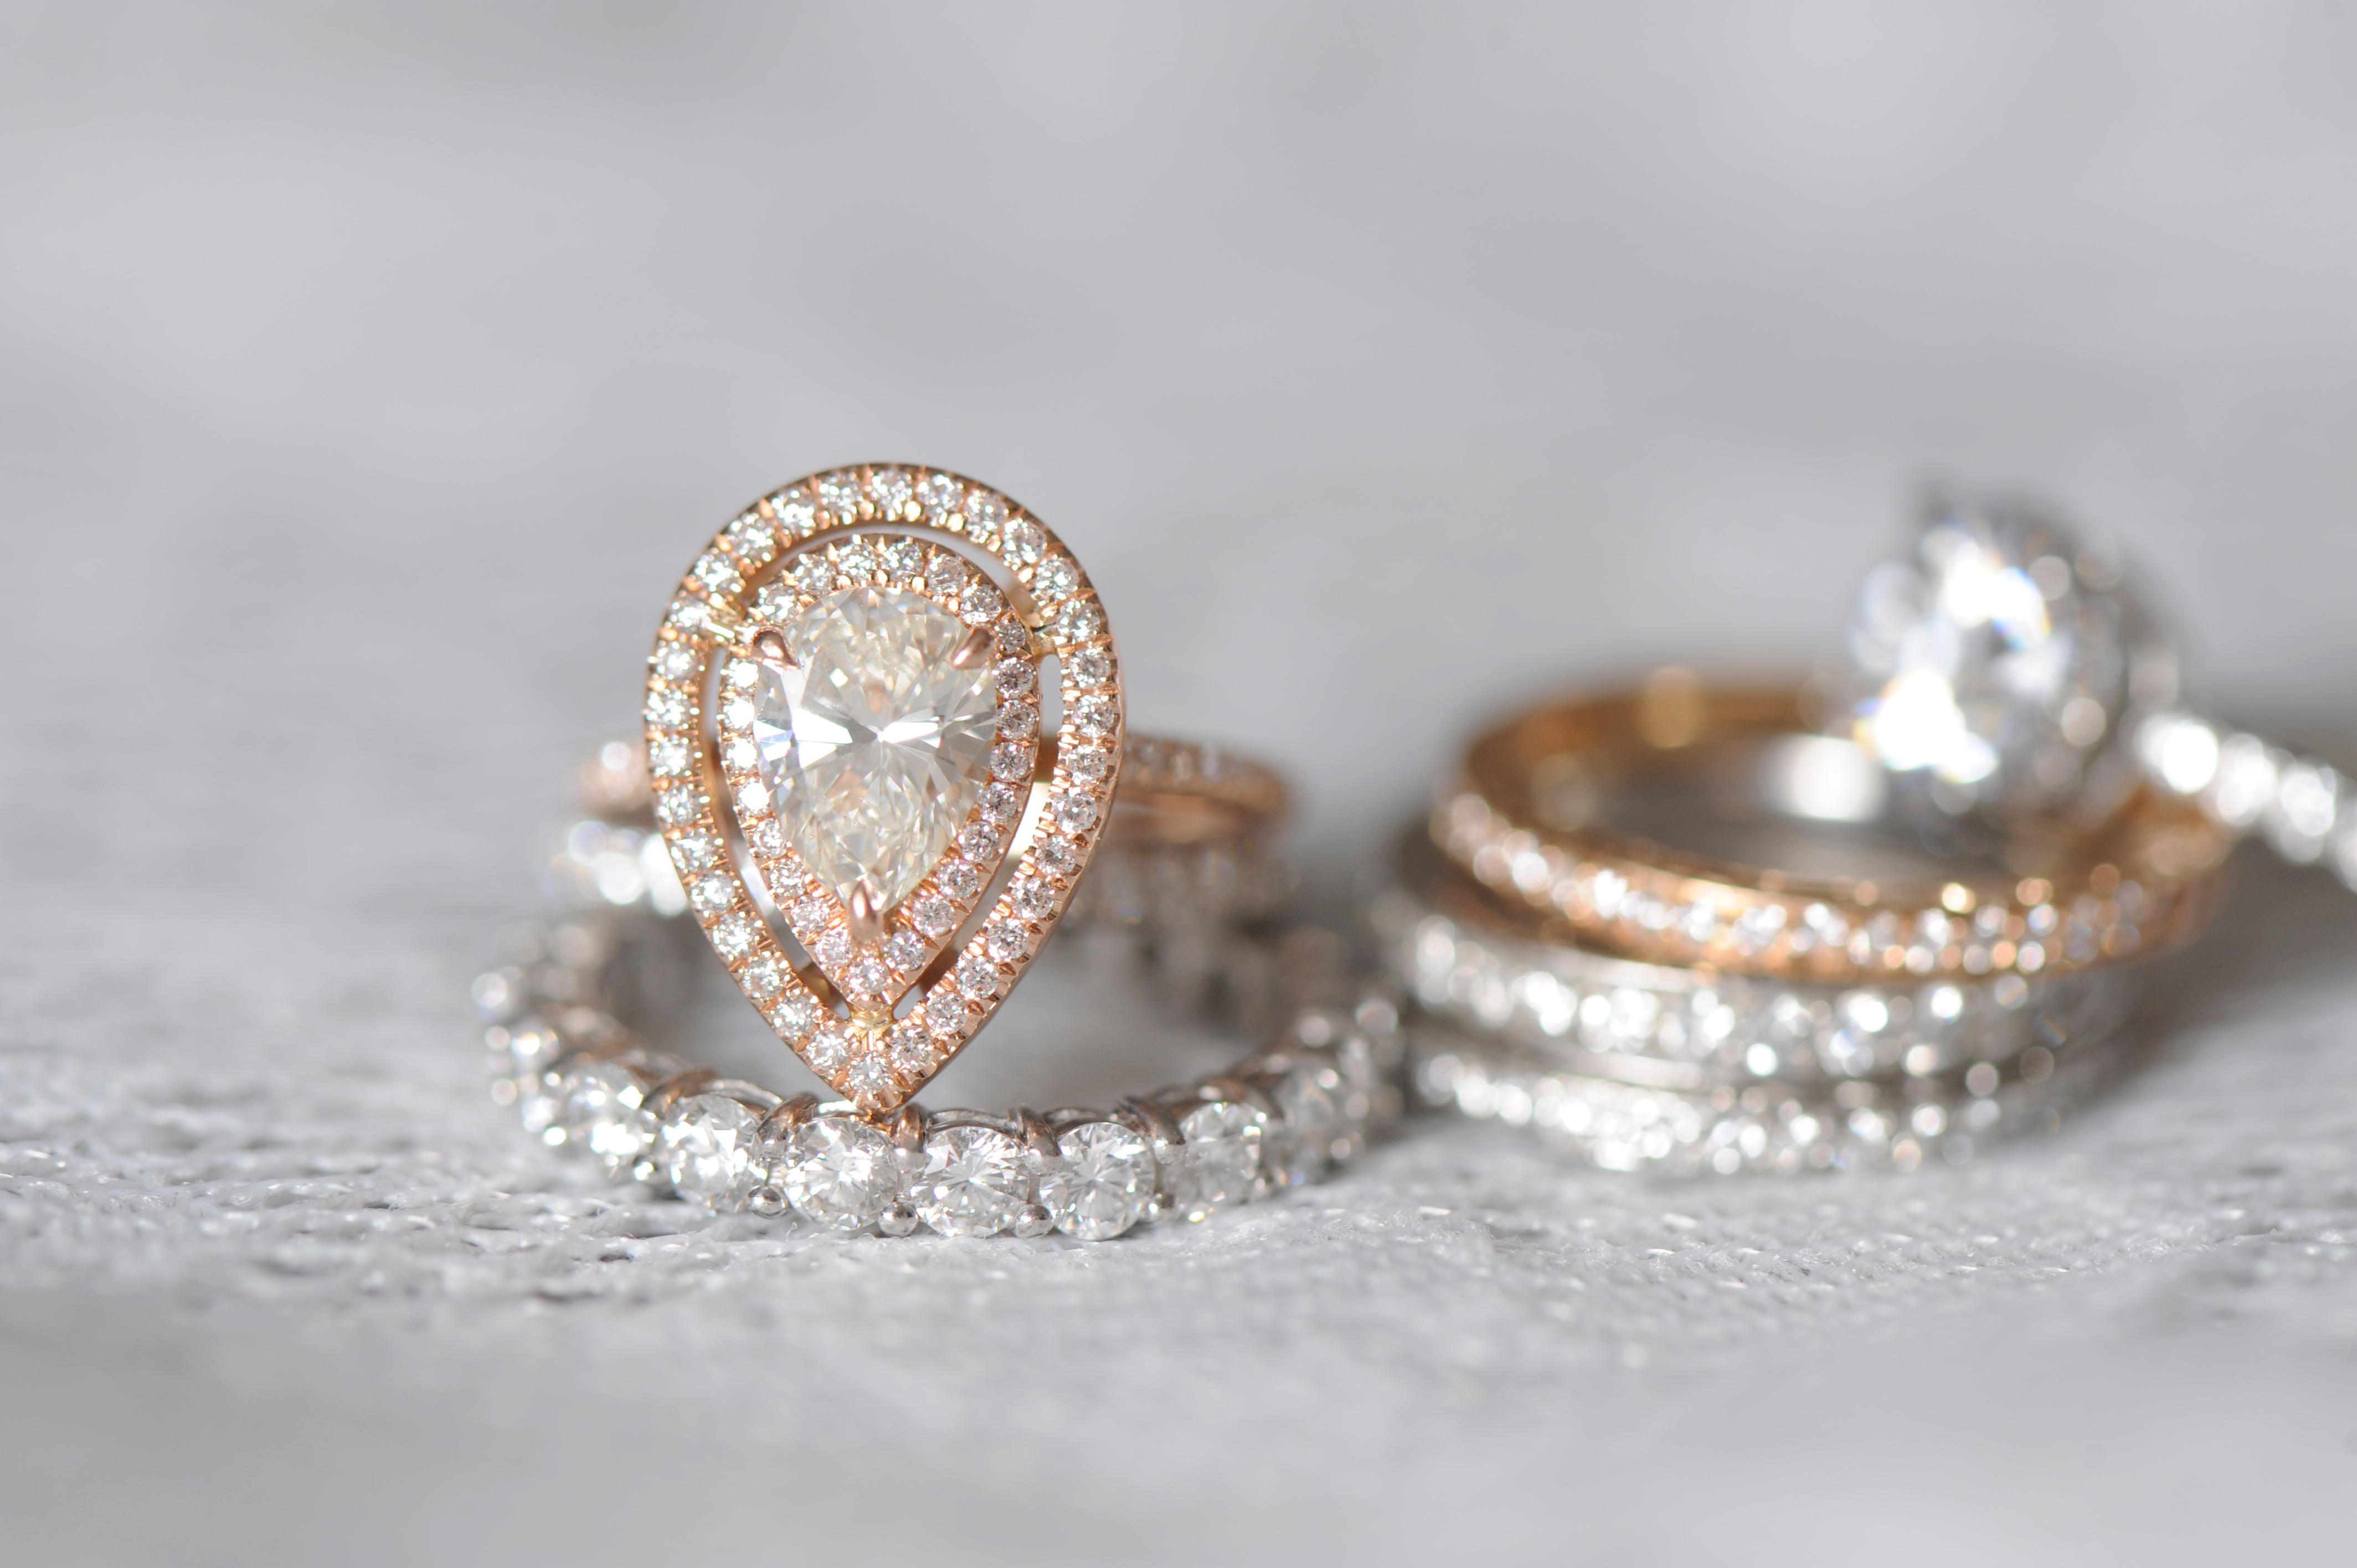 Pear double halo diamond ring and Wedding bands